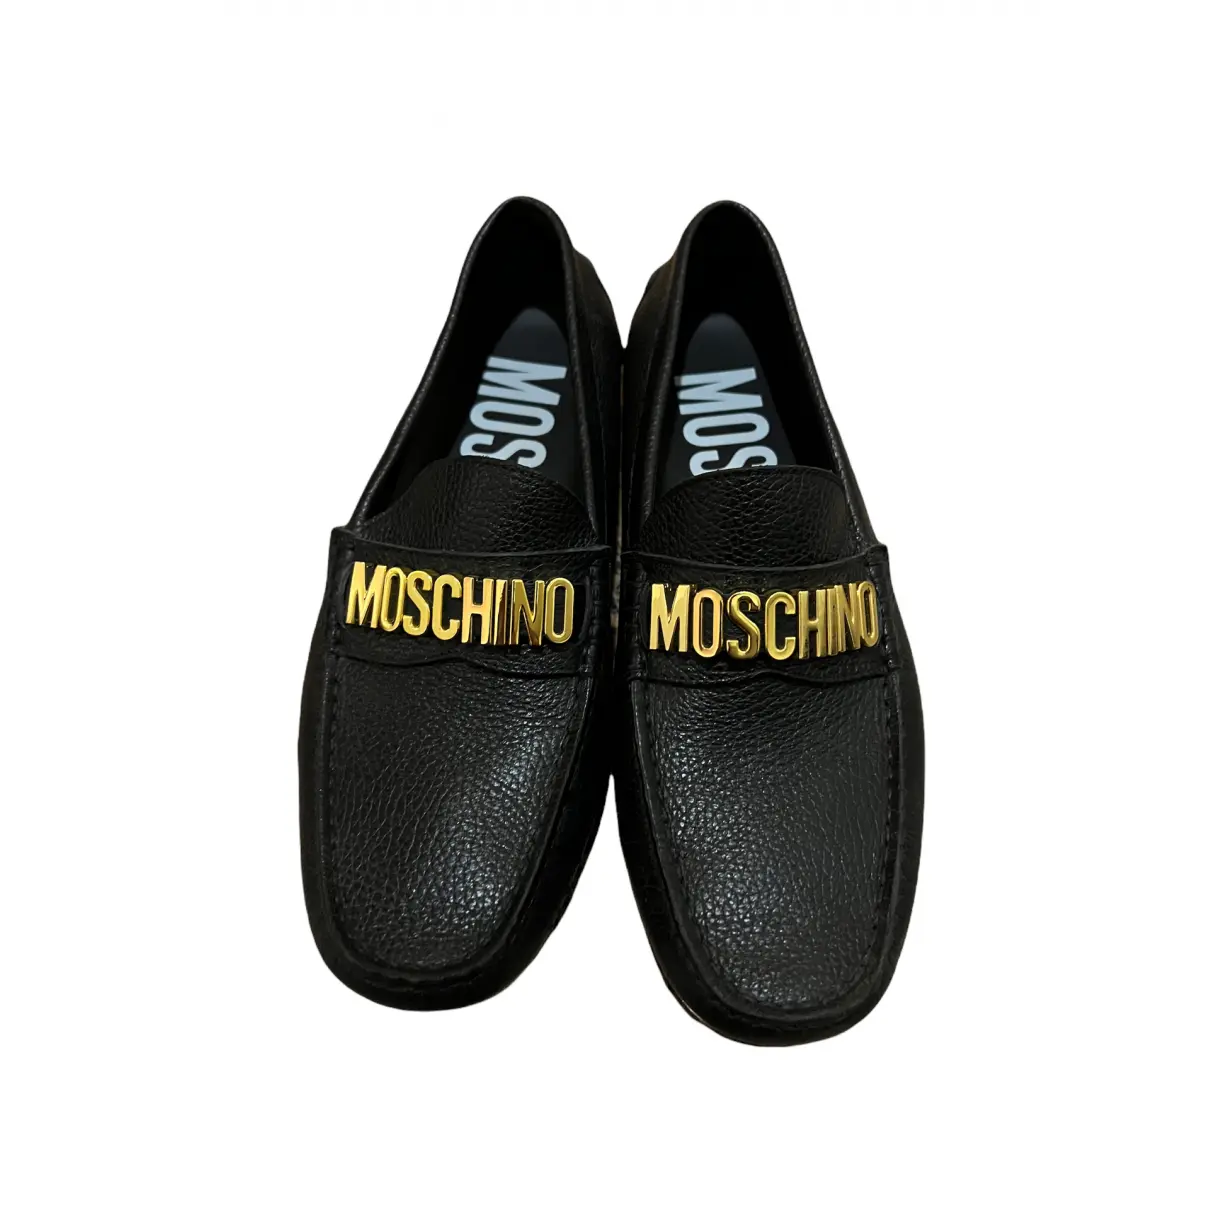 Buy Moschino Leather flats online